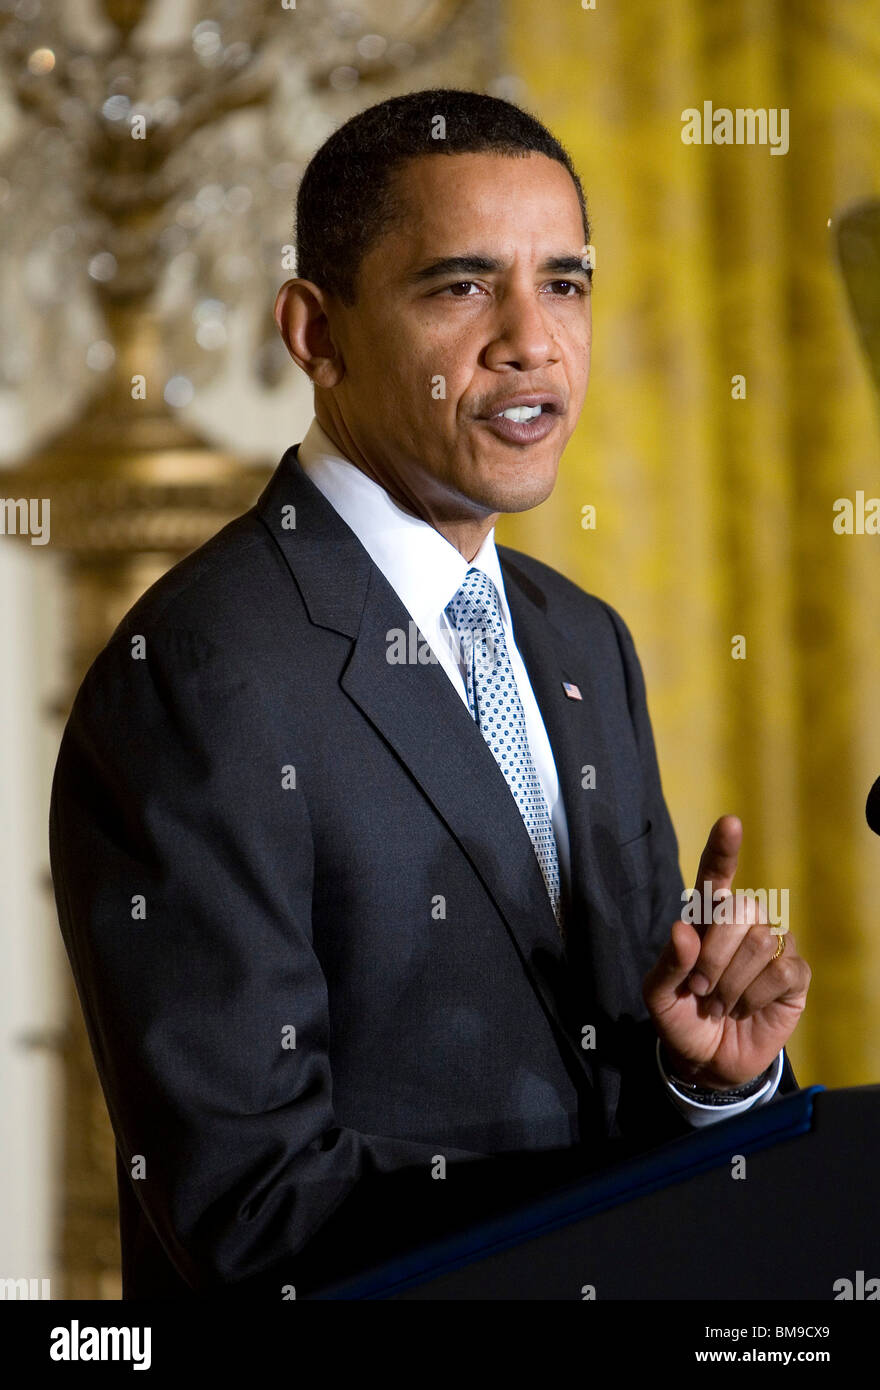 13 February 2009 – Washington, D.C. – President Barack Obama delivers remarks about the economic stimulus package to members of the Business Council in the East Room of the White House. Stock Photo